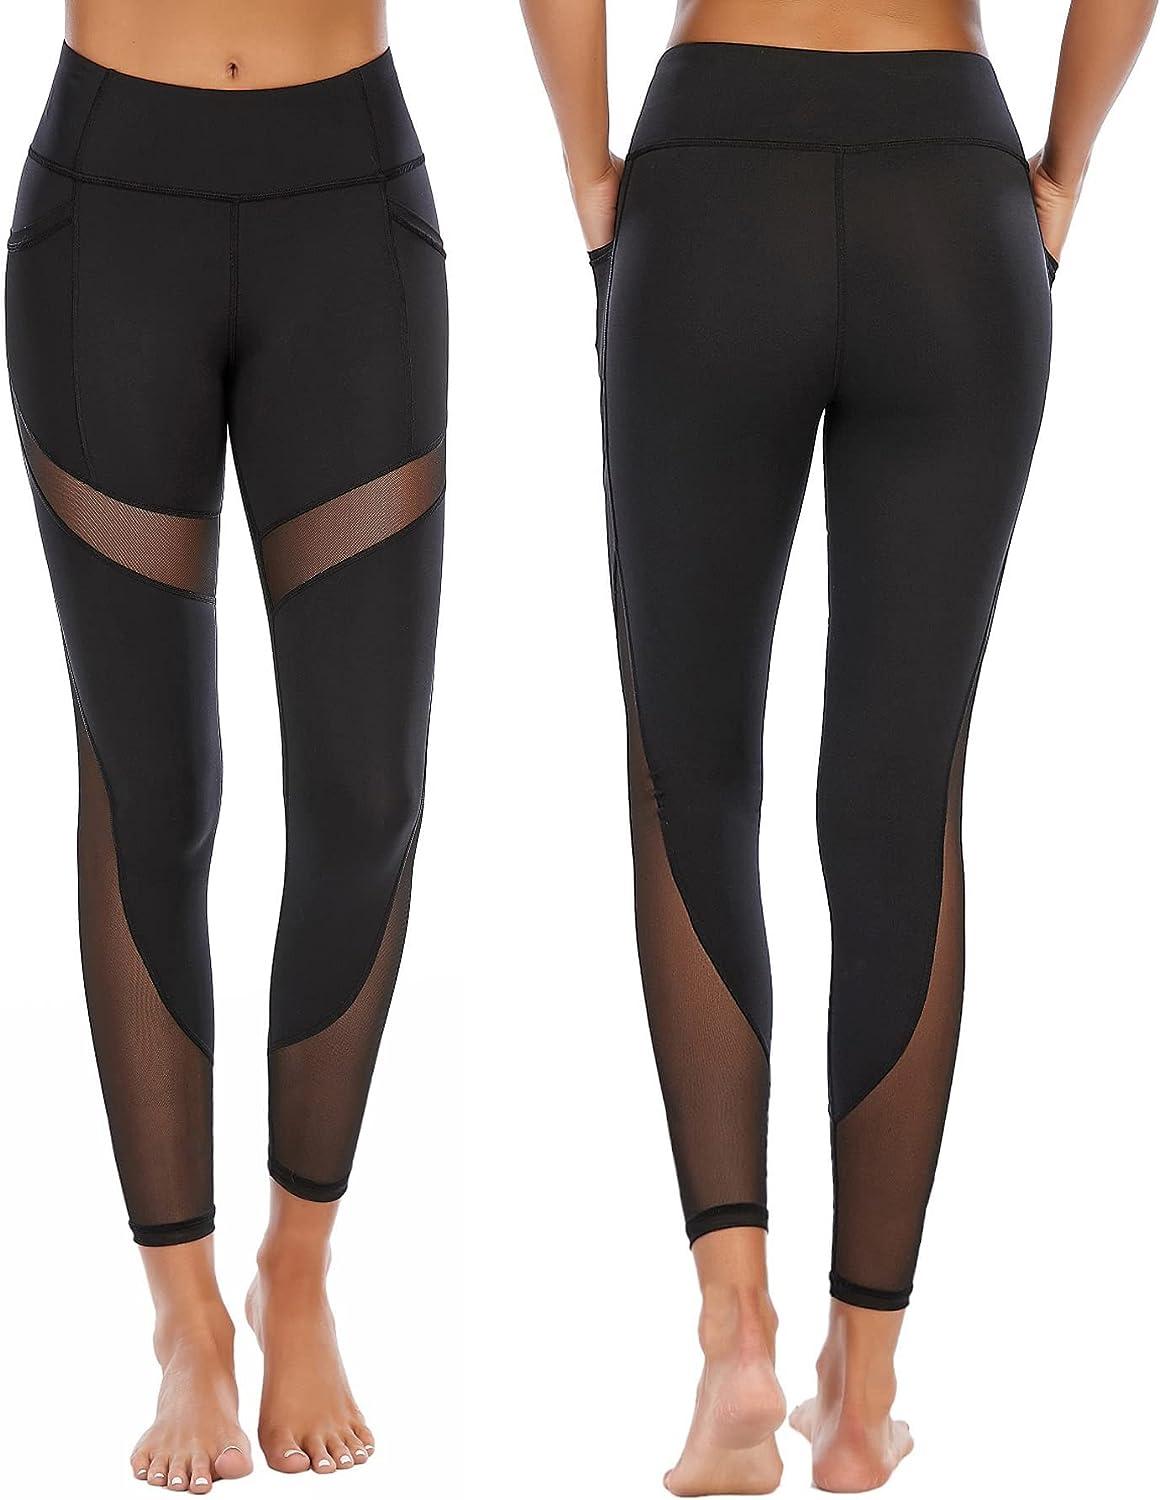 Yoga legging for Women Buttery Soft High Waist Stretch Tummy Control Running  Tights with Side Pockets 